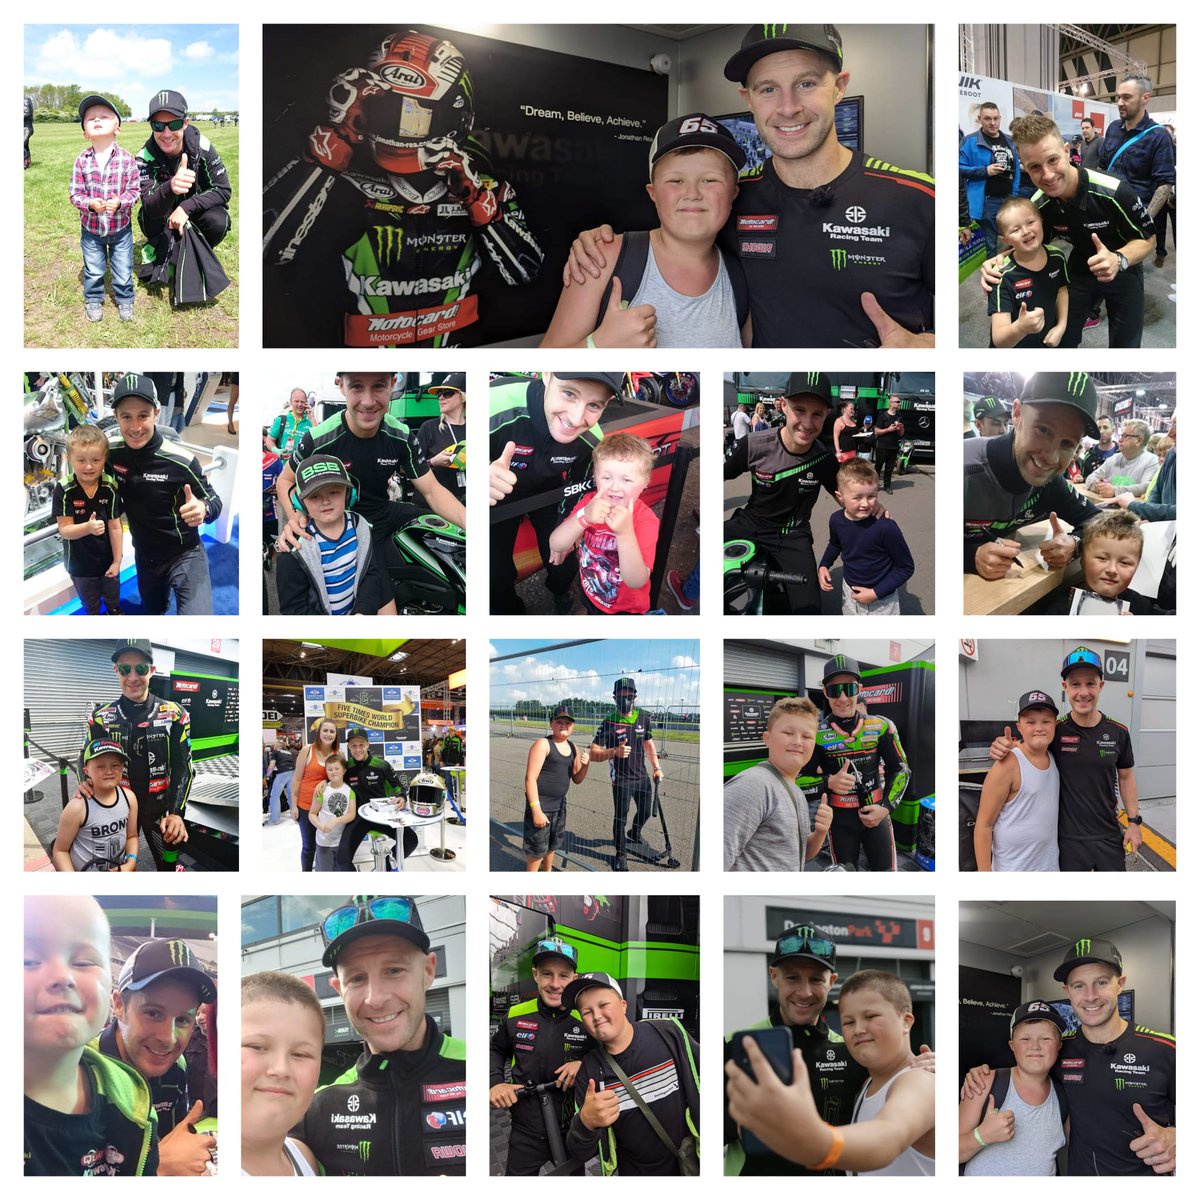 So next month @jonathanrea incredible @KRT_WorldSBK journey comes to an end. I'm happy I got to witness it from the beginning (I was 2 when it began, top left photo) it's been a mega ride and can't wait to see what the next chapter brings Champ! #Team65